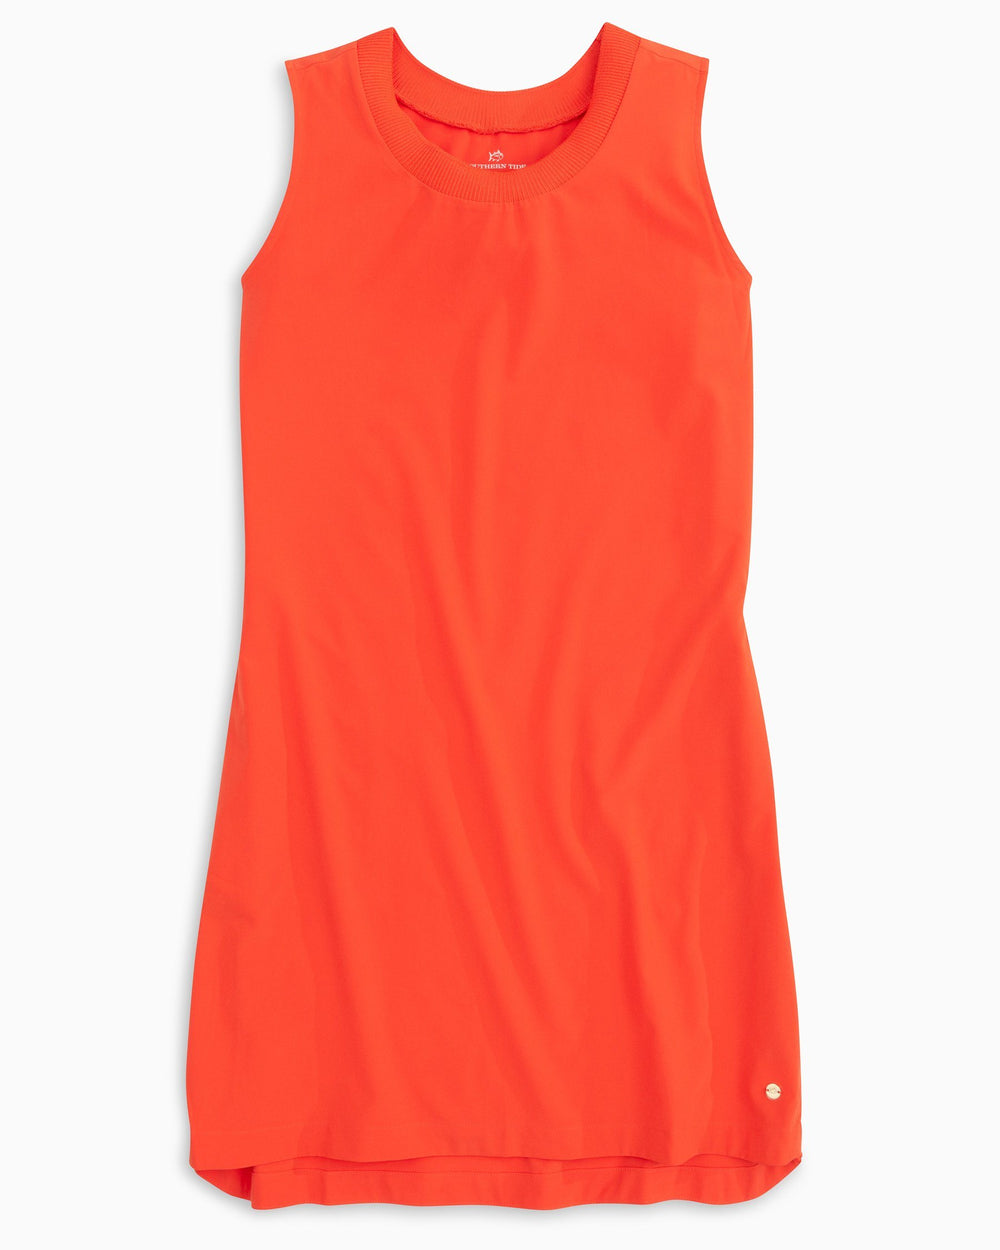 The flat view of the Women's Orange Gameday Dress by Southern Tide - EndZone Orange